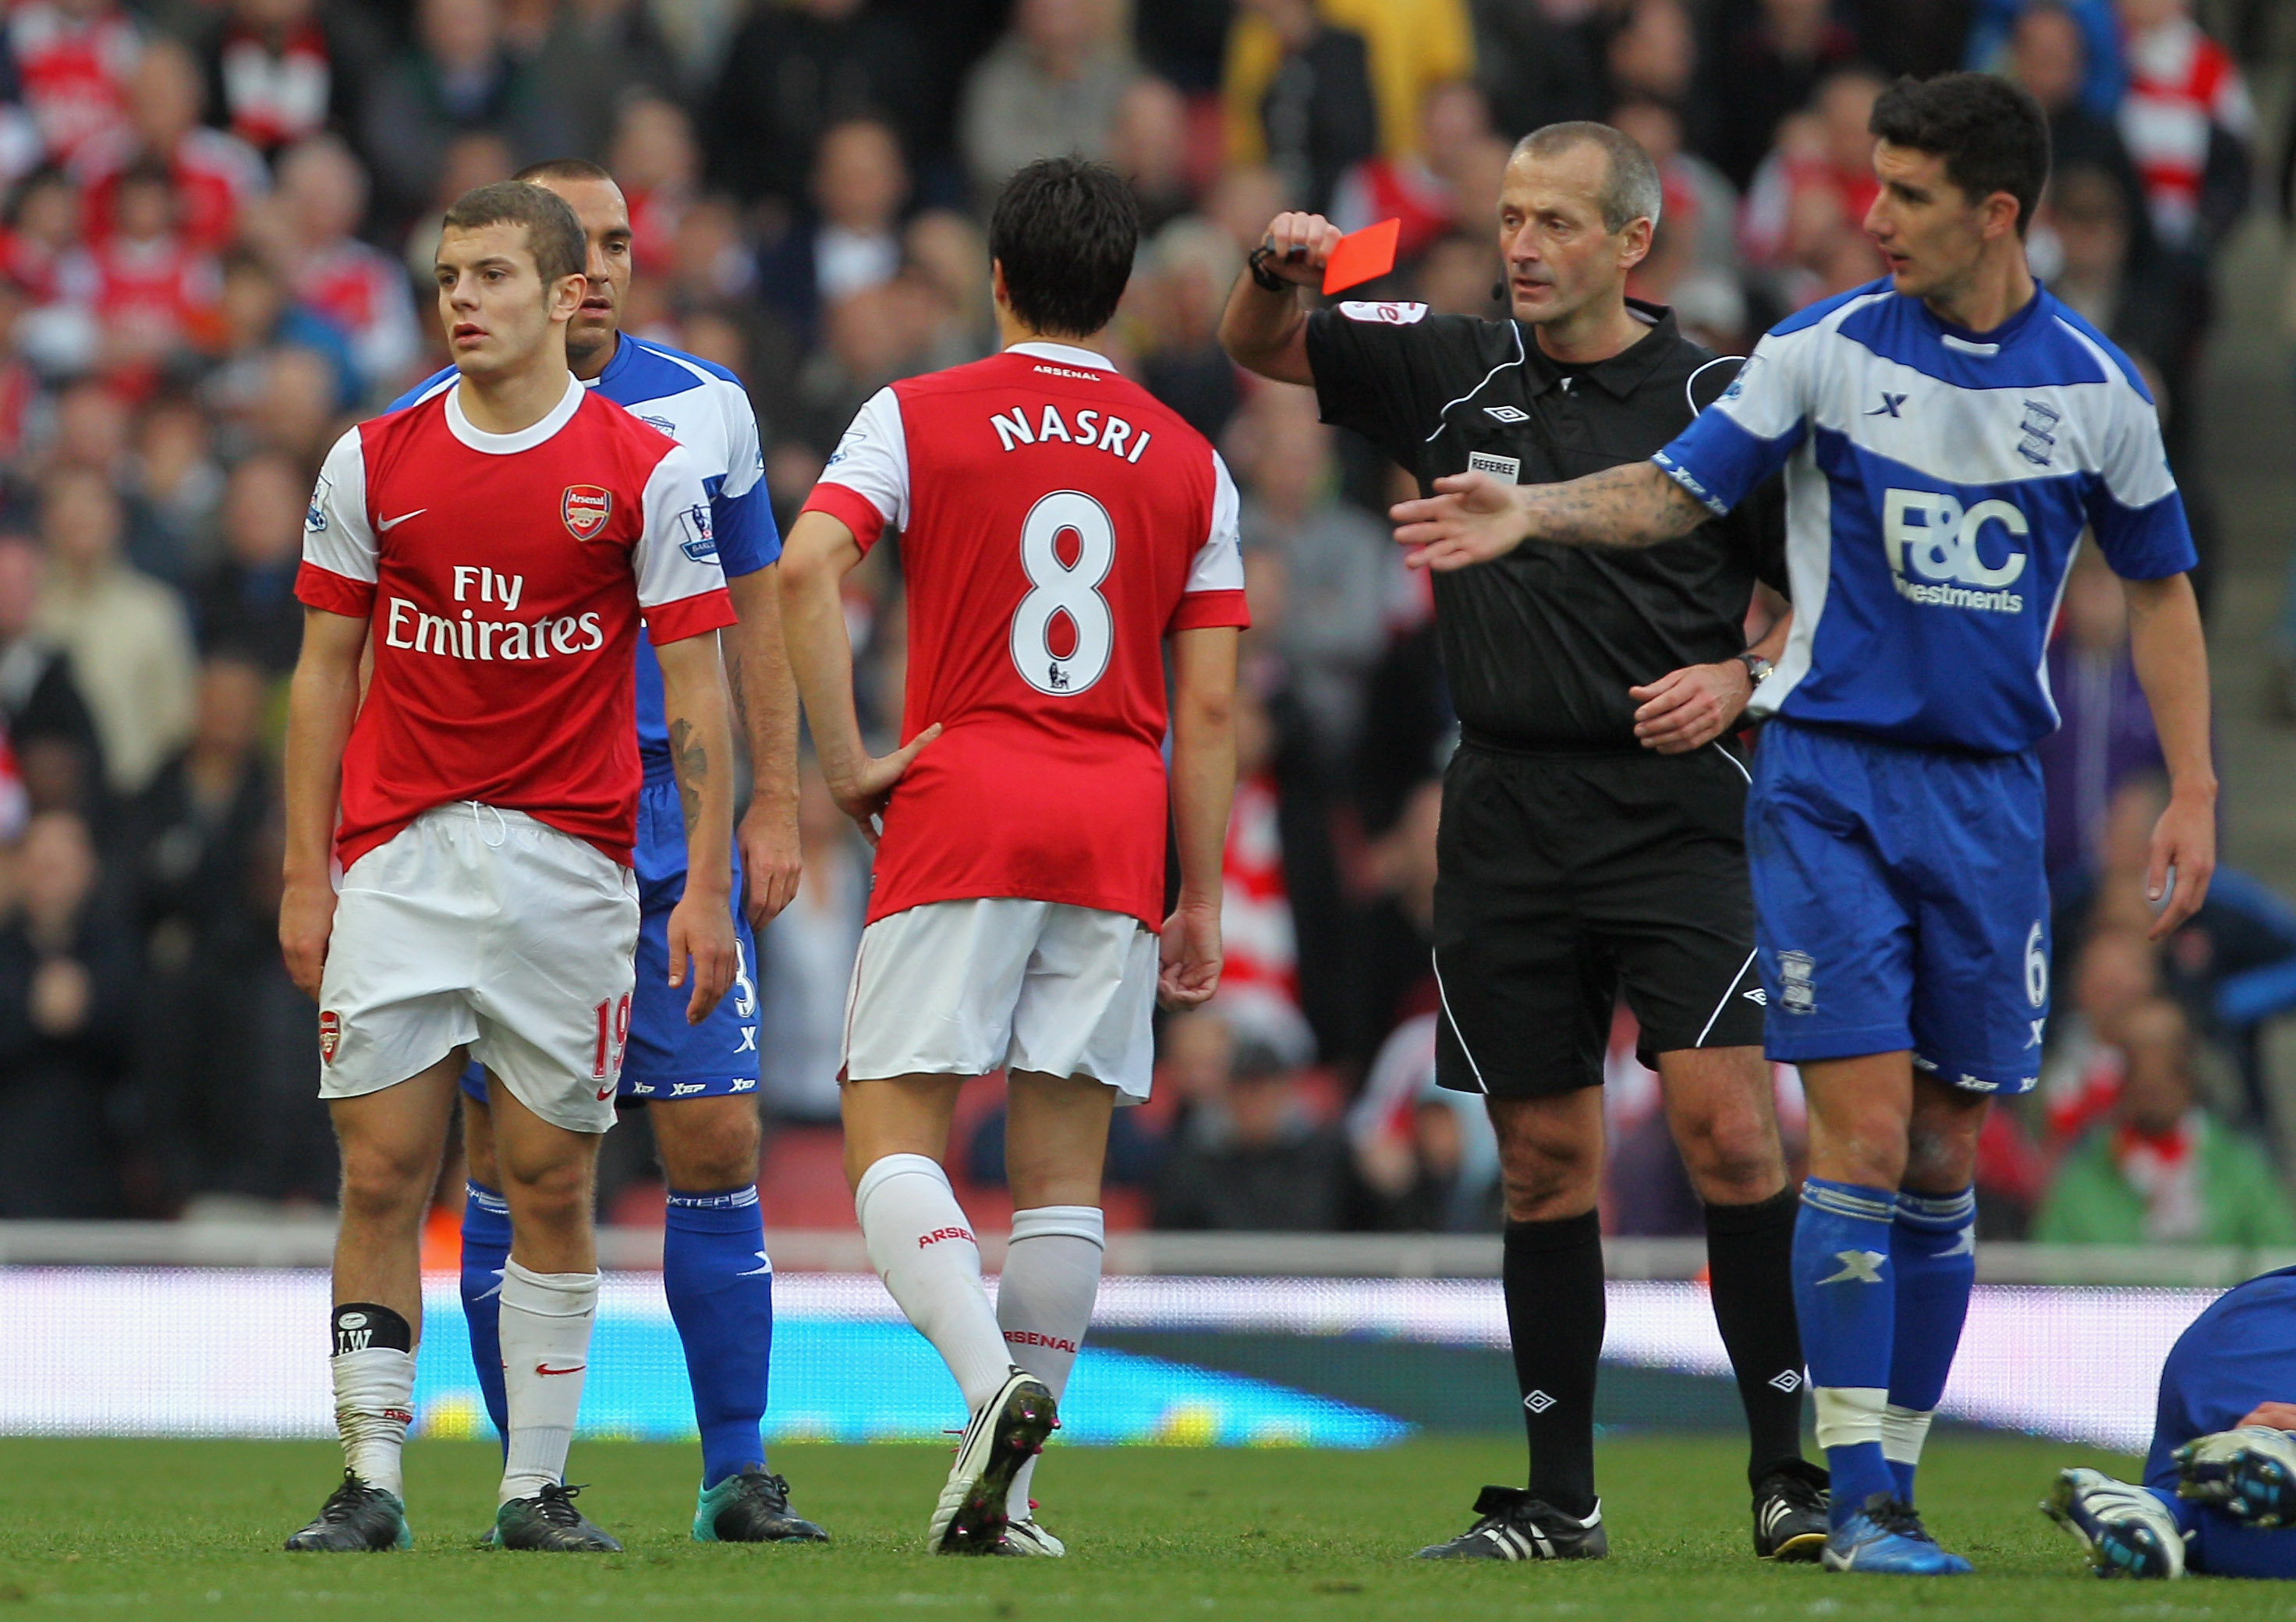 LONDON, ENGLAND - OCTOBER 16: Jack Wilshere of Arsenal is shown the red card by match referee Martin Atkinson during the Barclays Premier League match between Arsenal and Birmingham City at Emirates Stadium on October 16, 2010 in London, England.  (Photo 